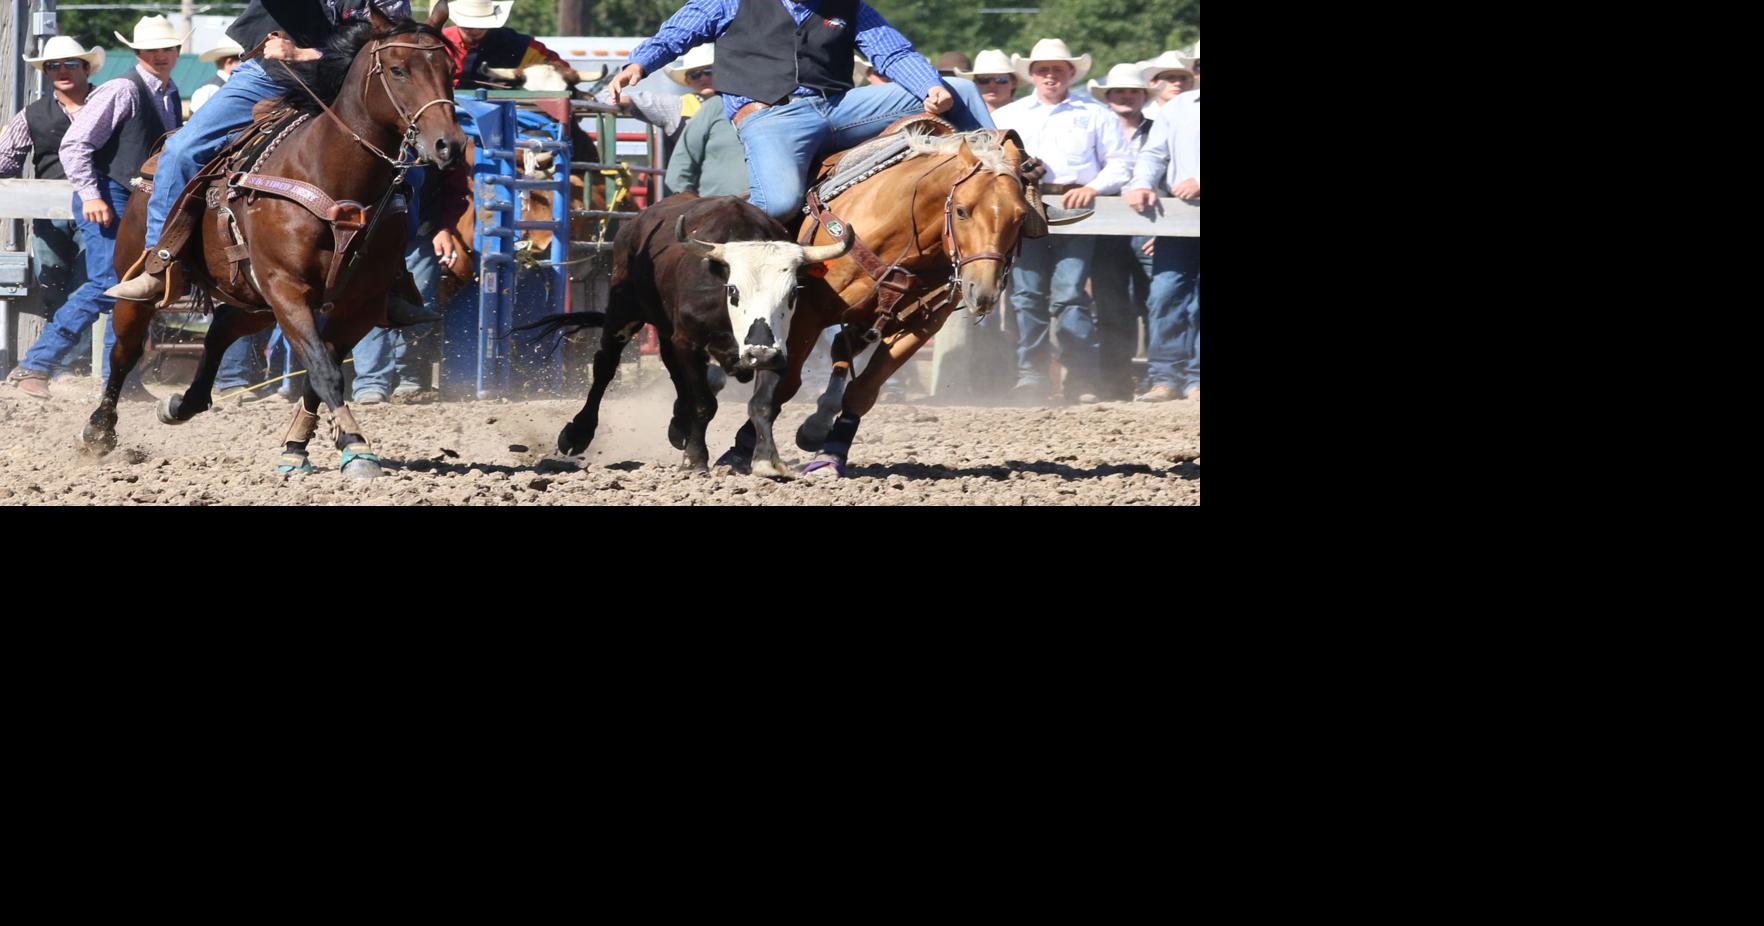 CSC cowboys fare well at Riverton rodeo